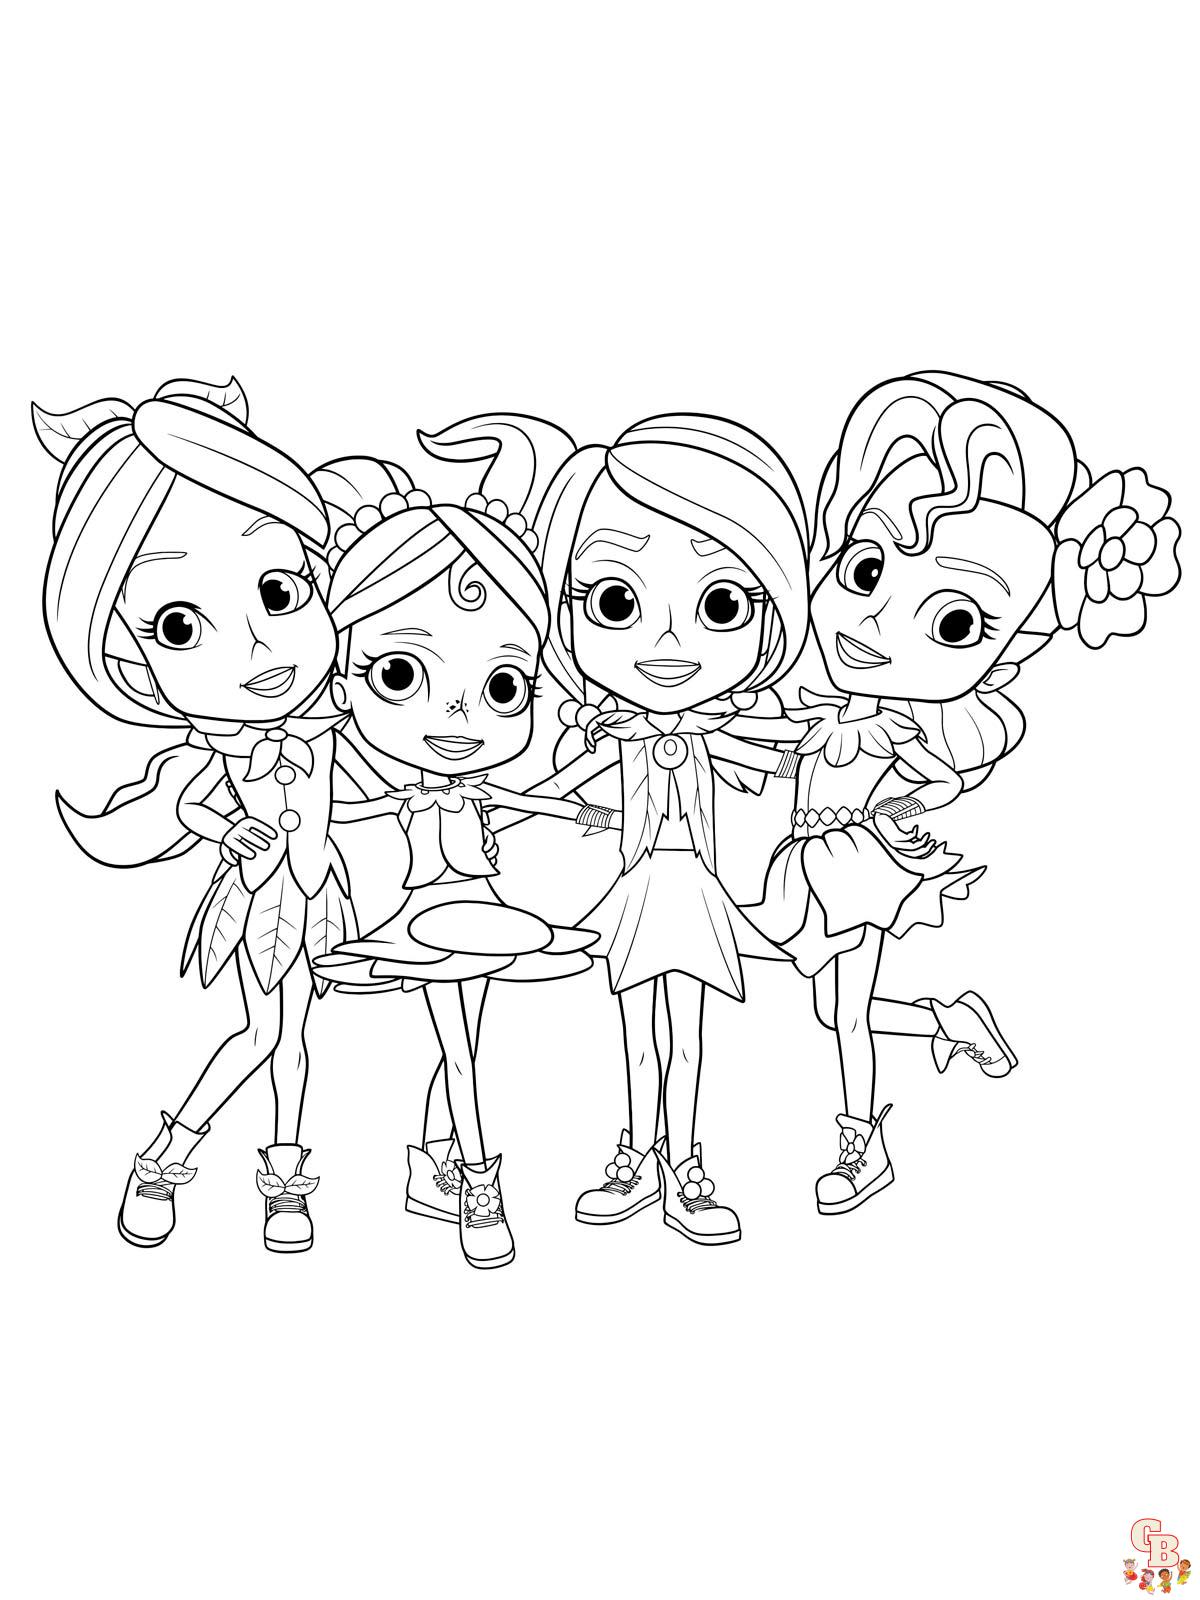 Rainbow Rangers Coloring Pages 18